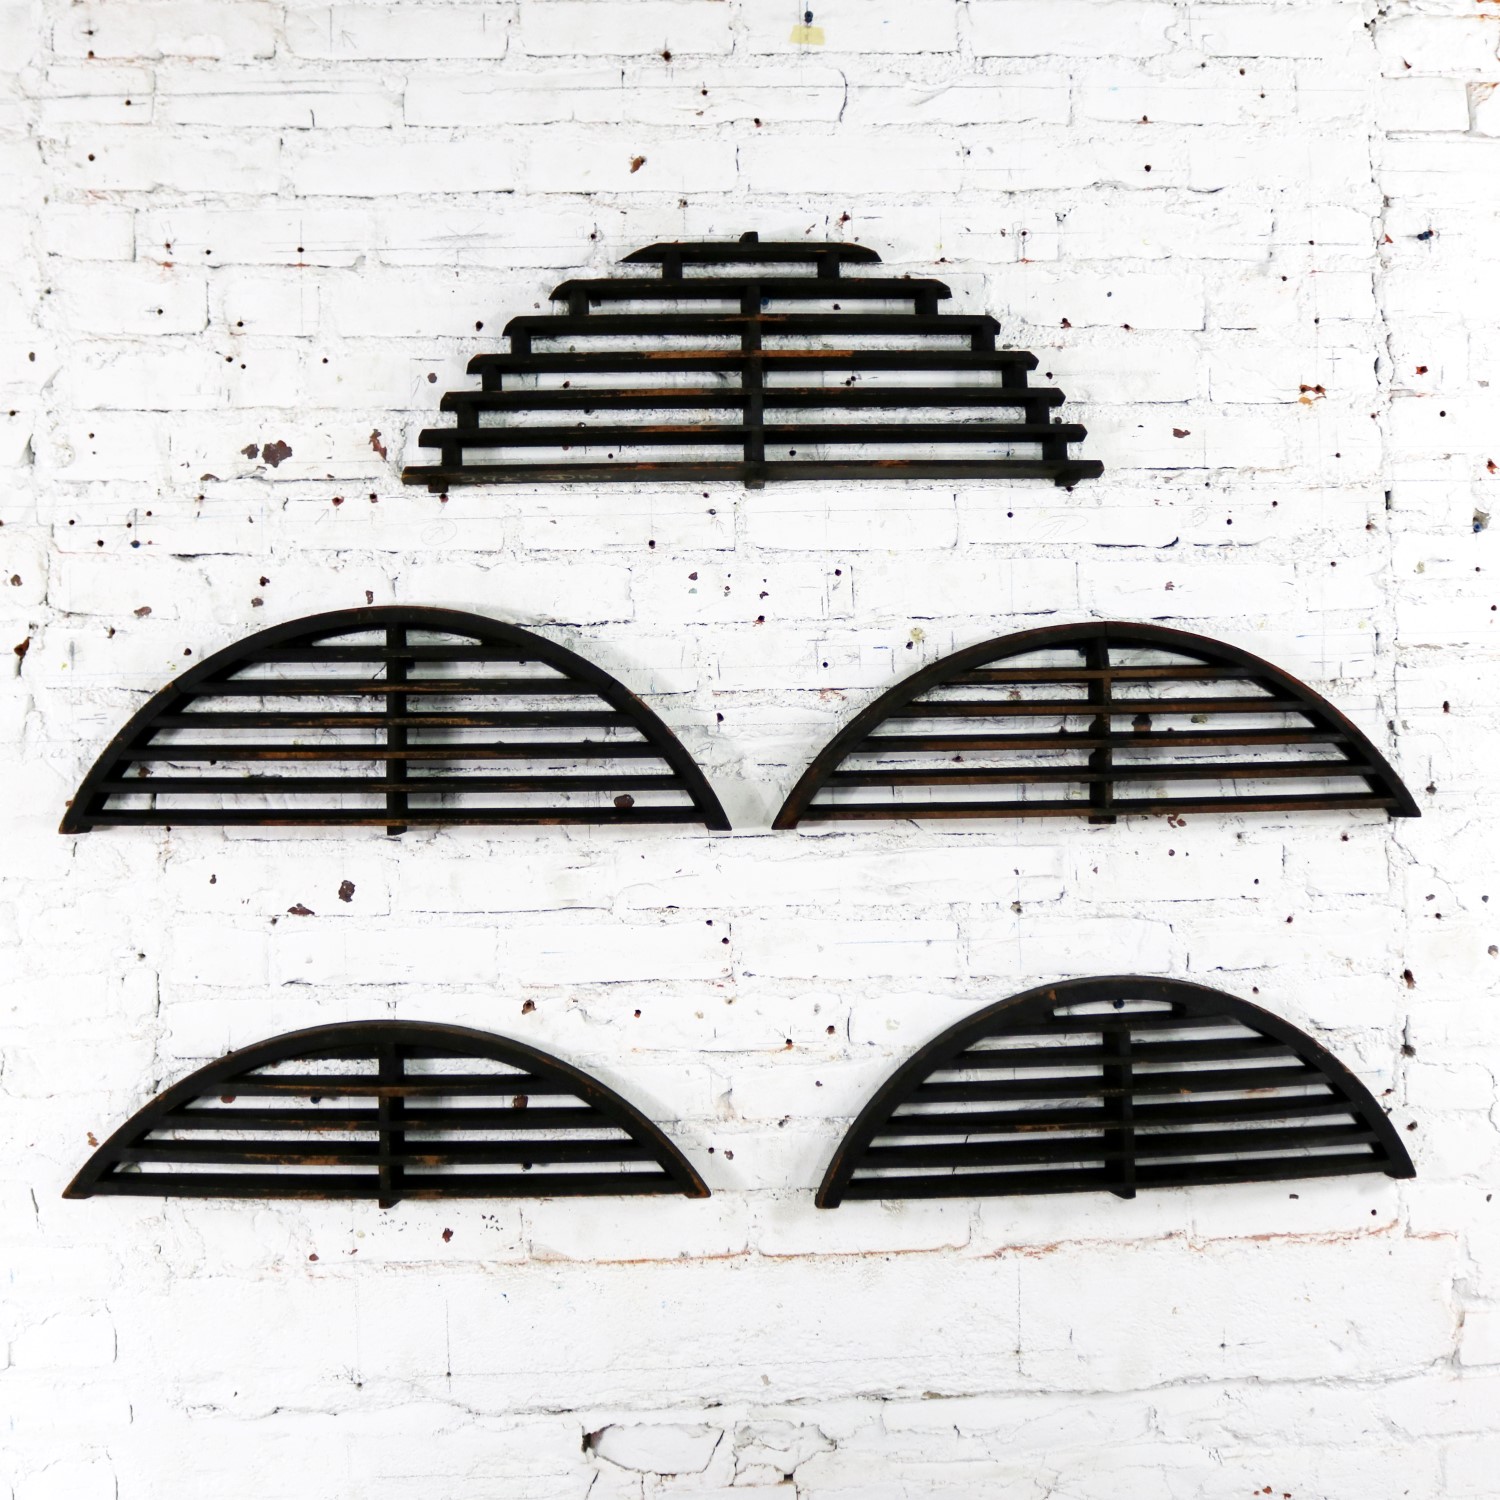 Antique Industrial Arched Foundry Patterns for Molds Handmade Wood – Group 3